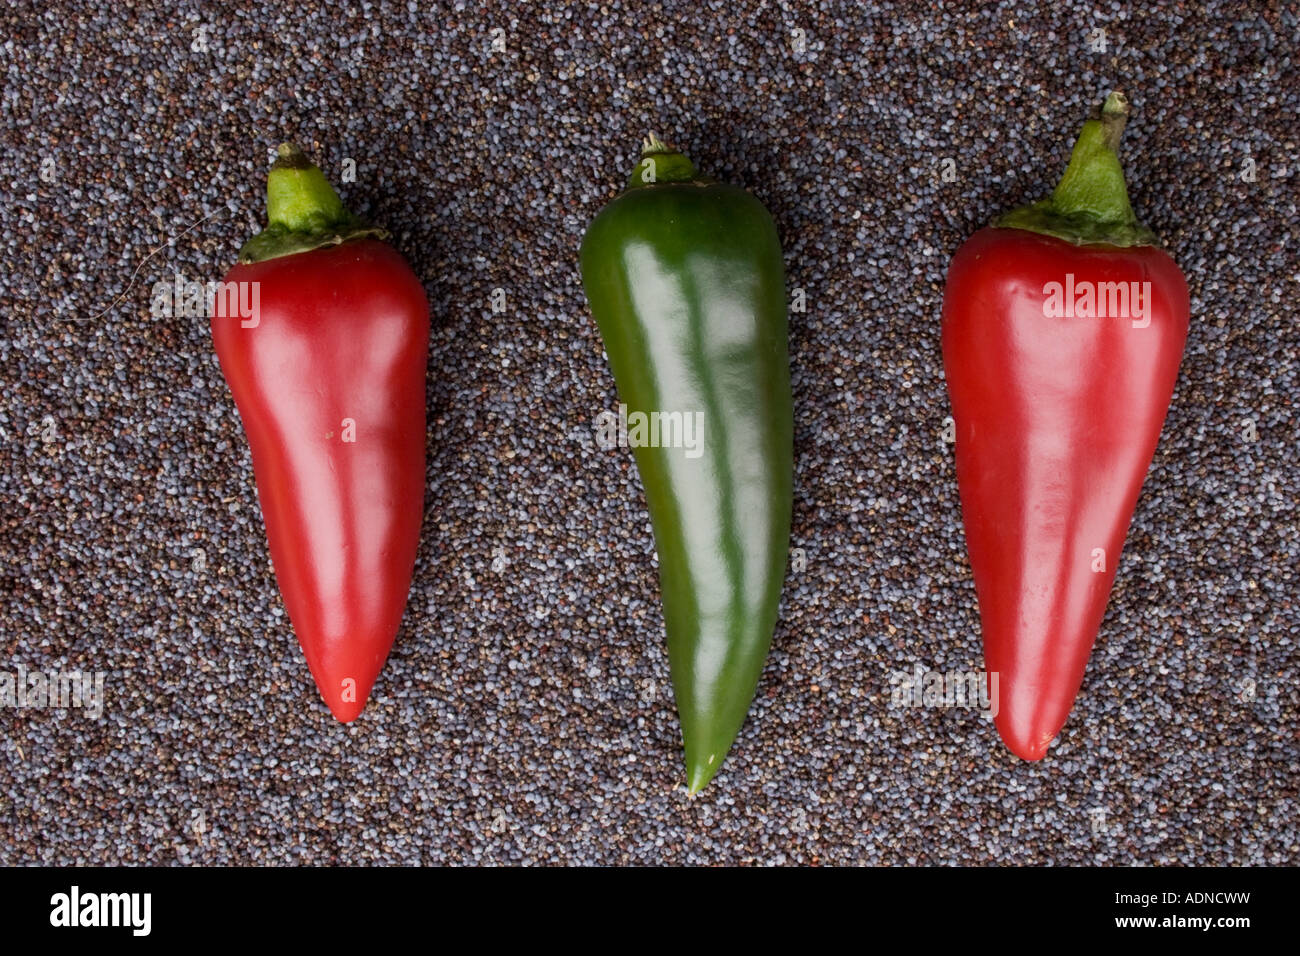 Three Chili Peppers, red and green on blue Poppy Seeds Pointing downwards. Stock Photo